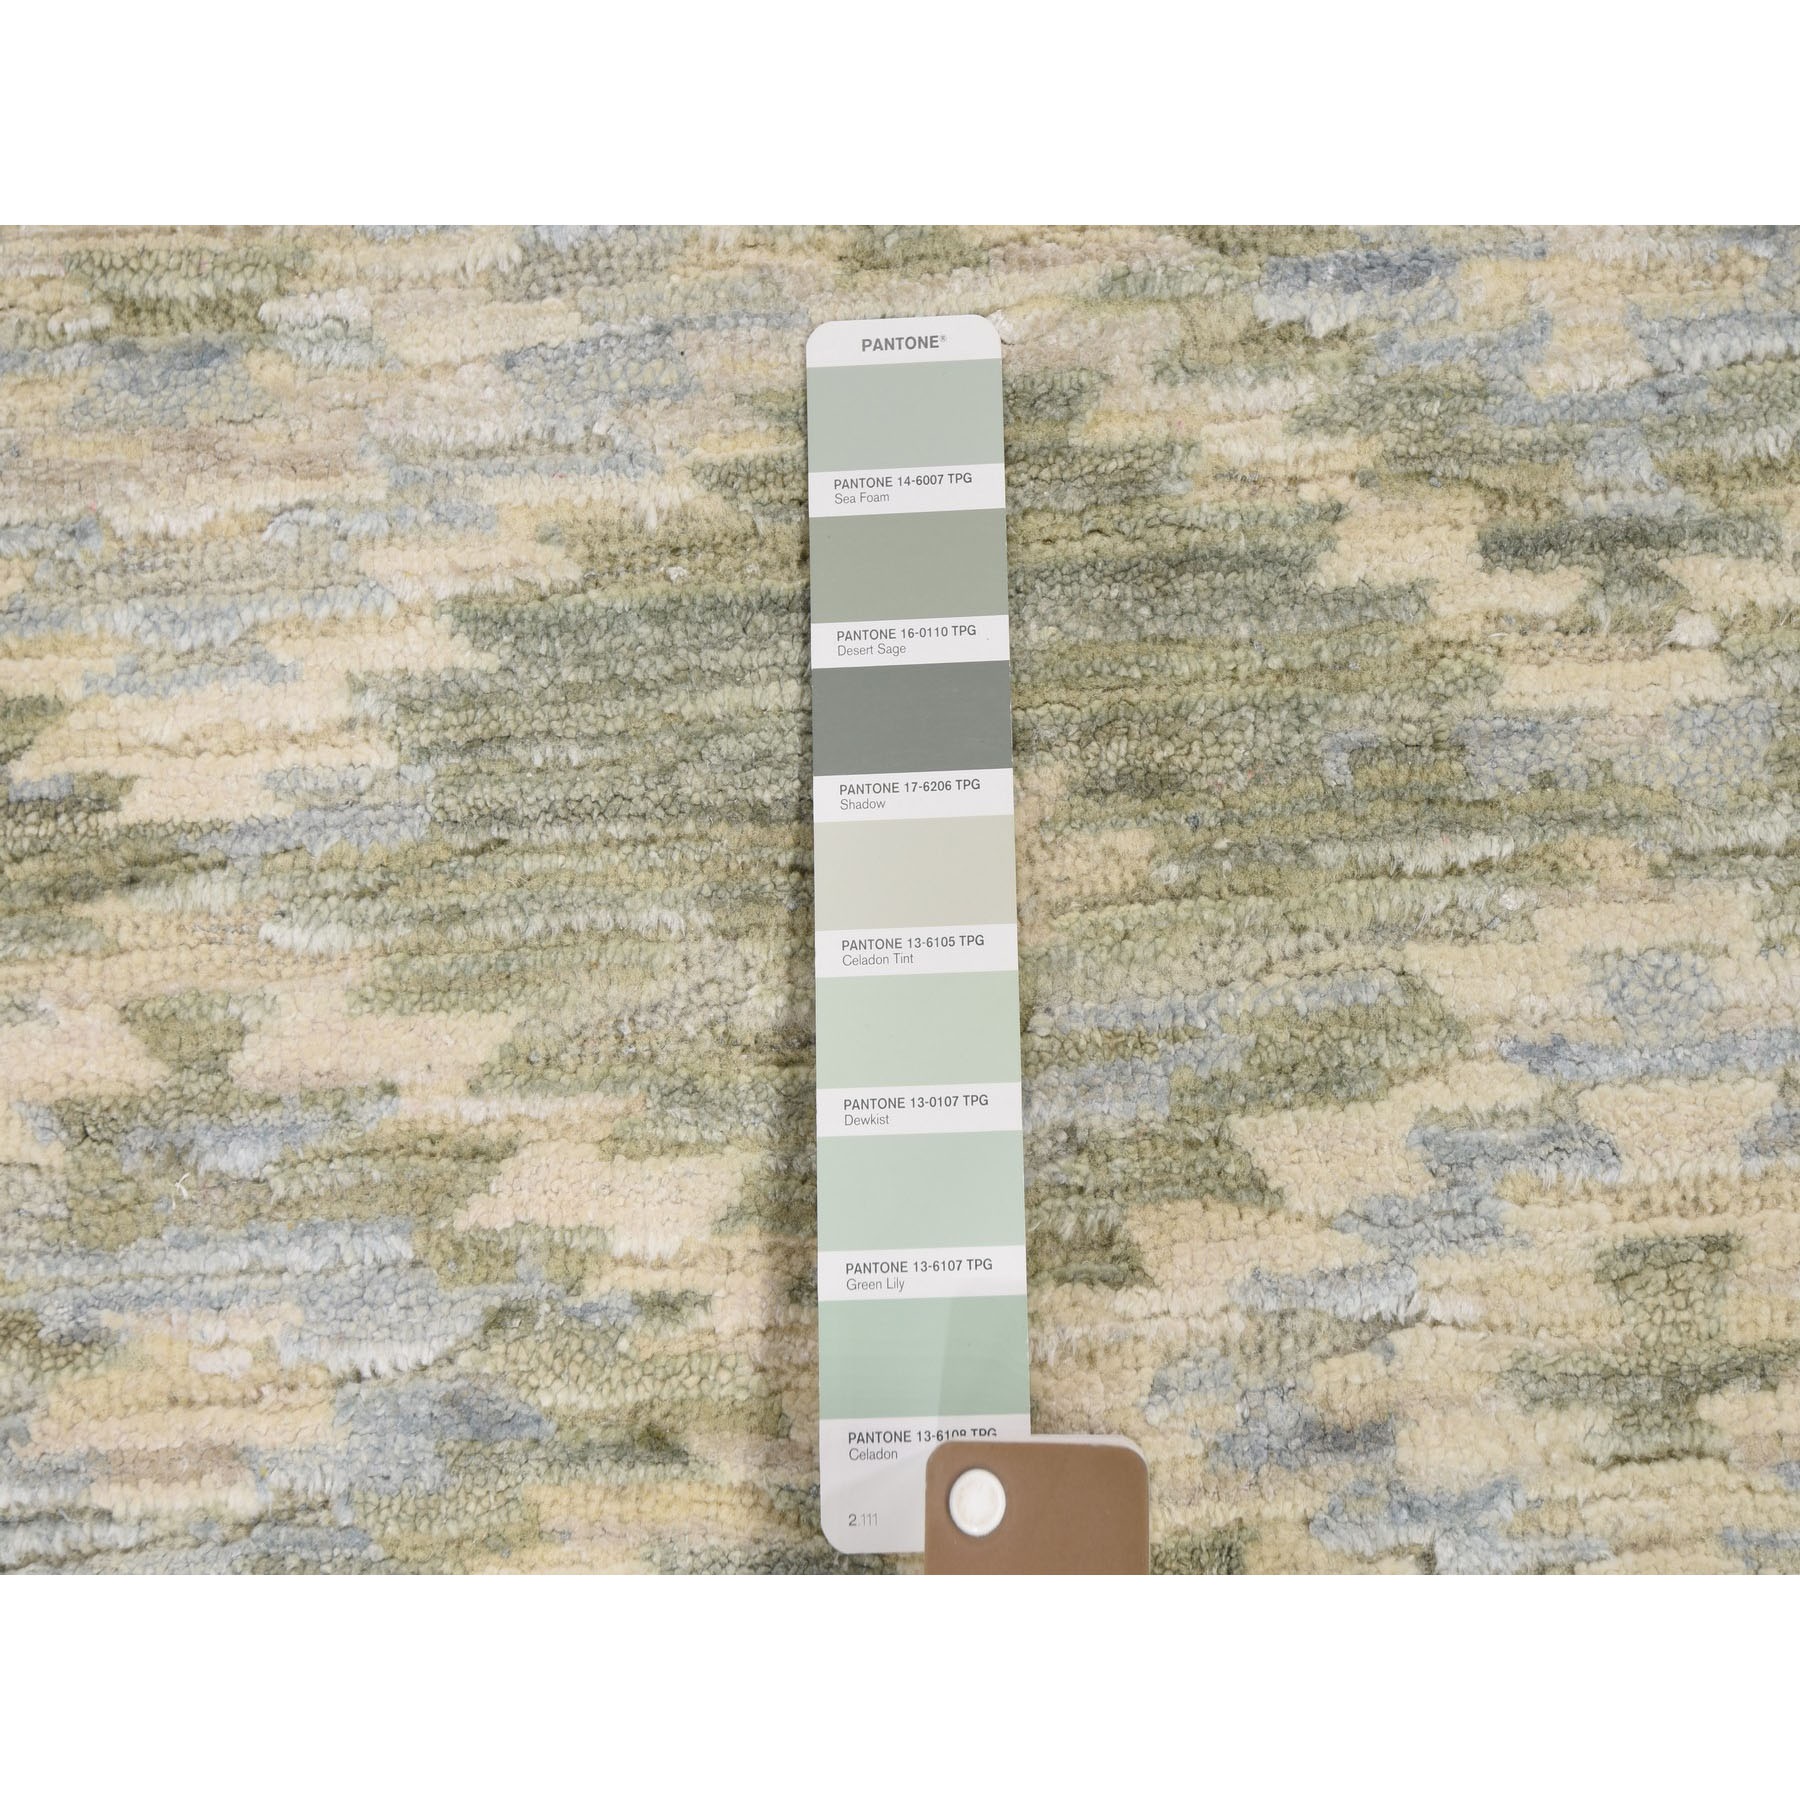 8-10 x12-1  THE PASTEL COLLECTION, Silk With Textured Wool Hand Knotted Oriental Rug 